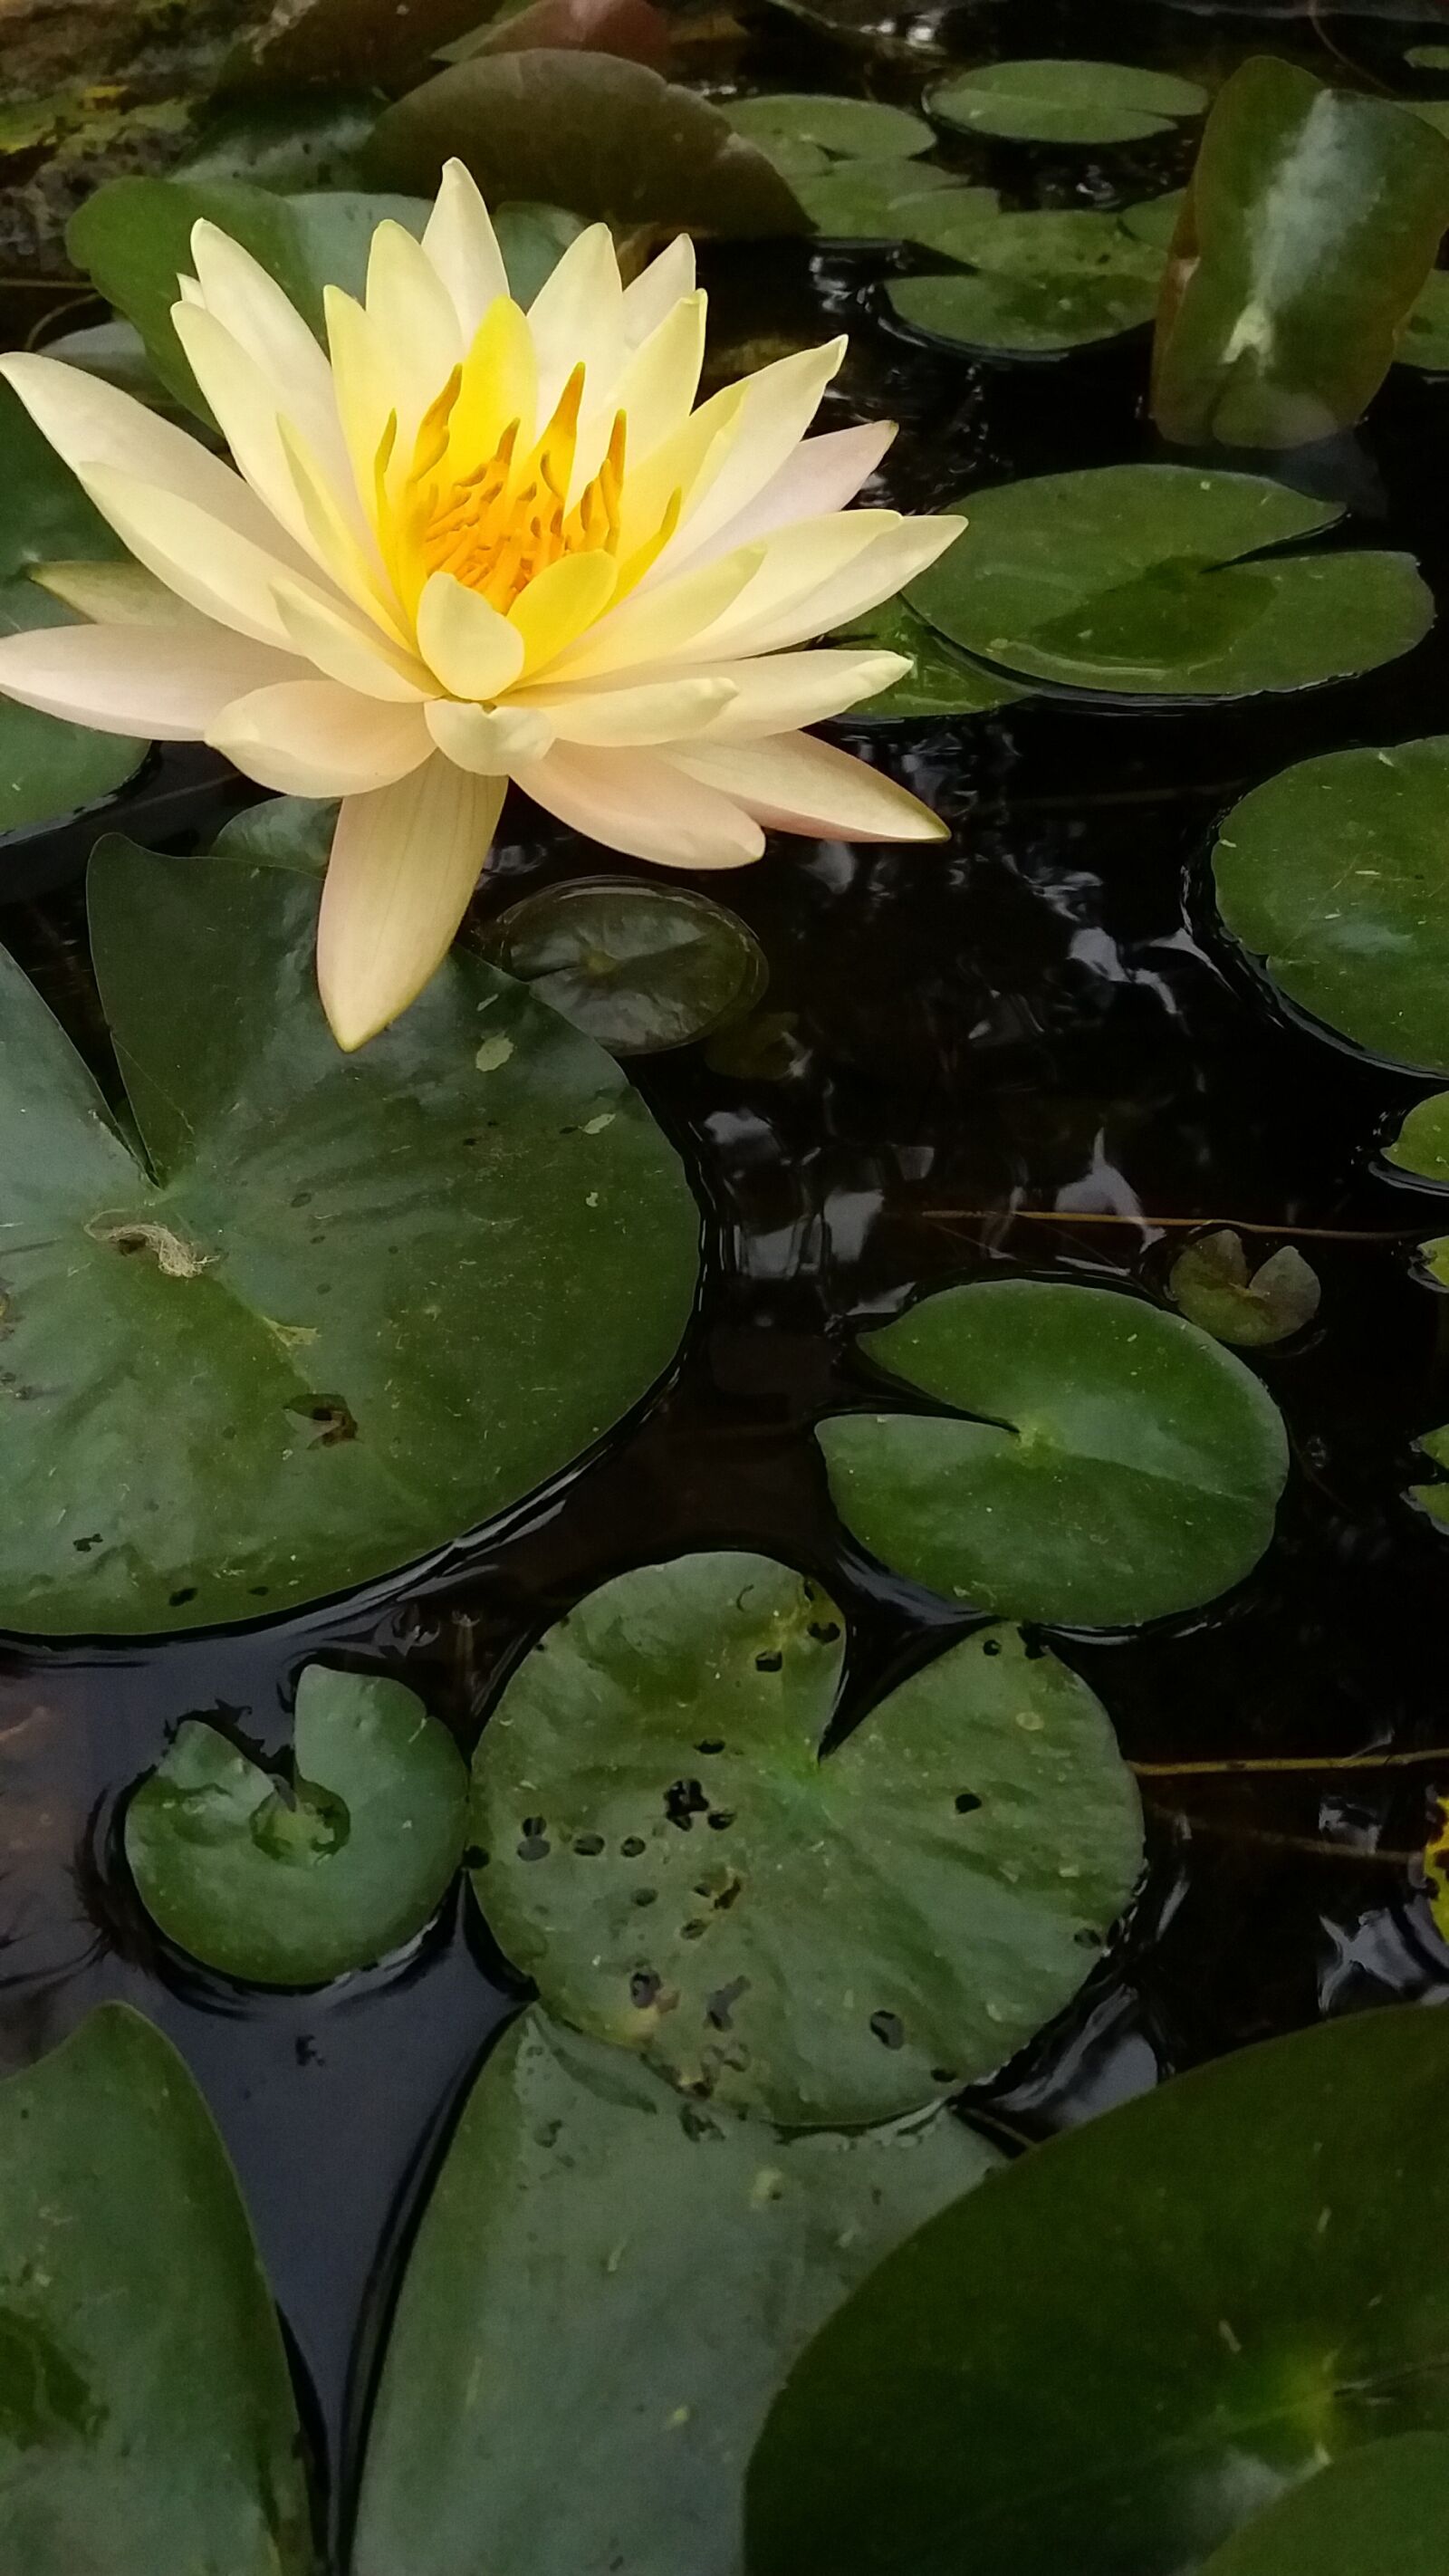 Samsung Galaxy A9 Pro sample photo. Lotus, flowers outdoor, beauty photography